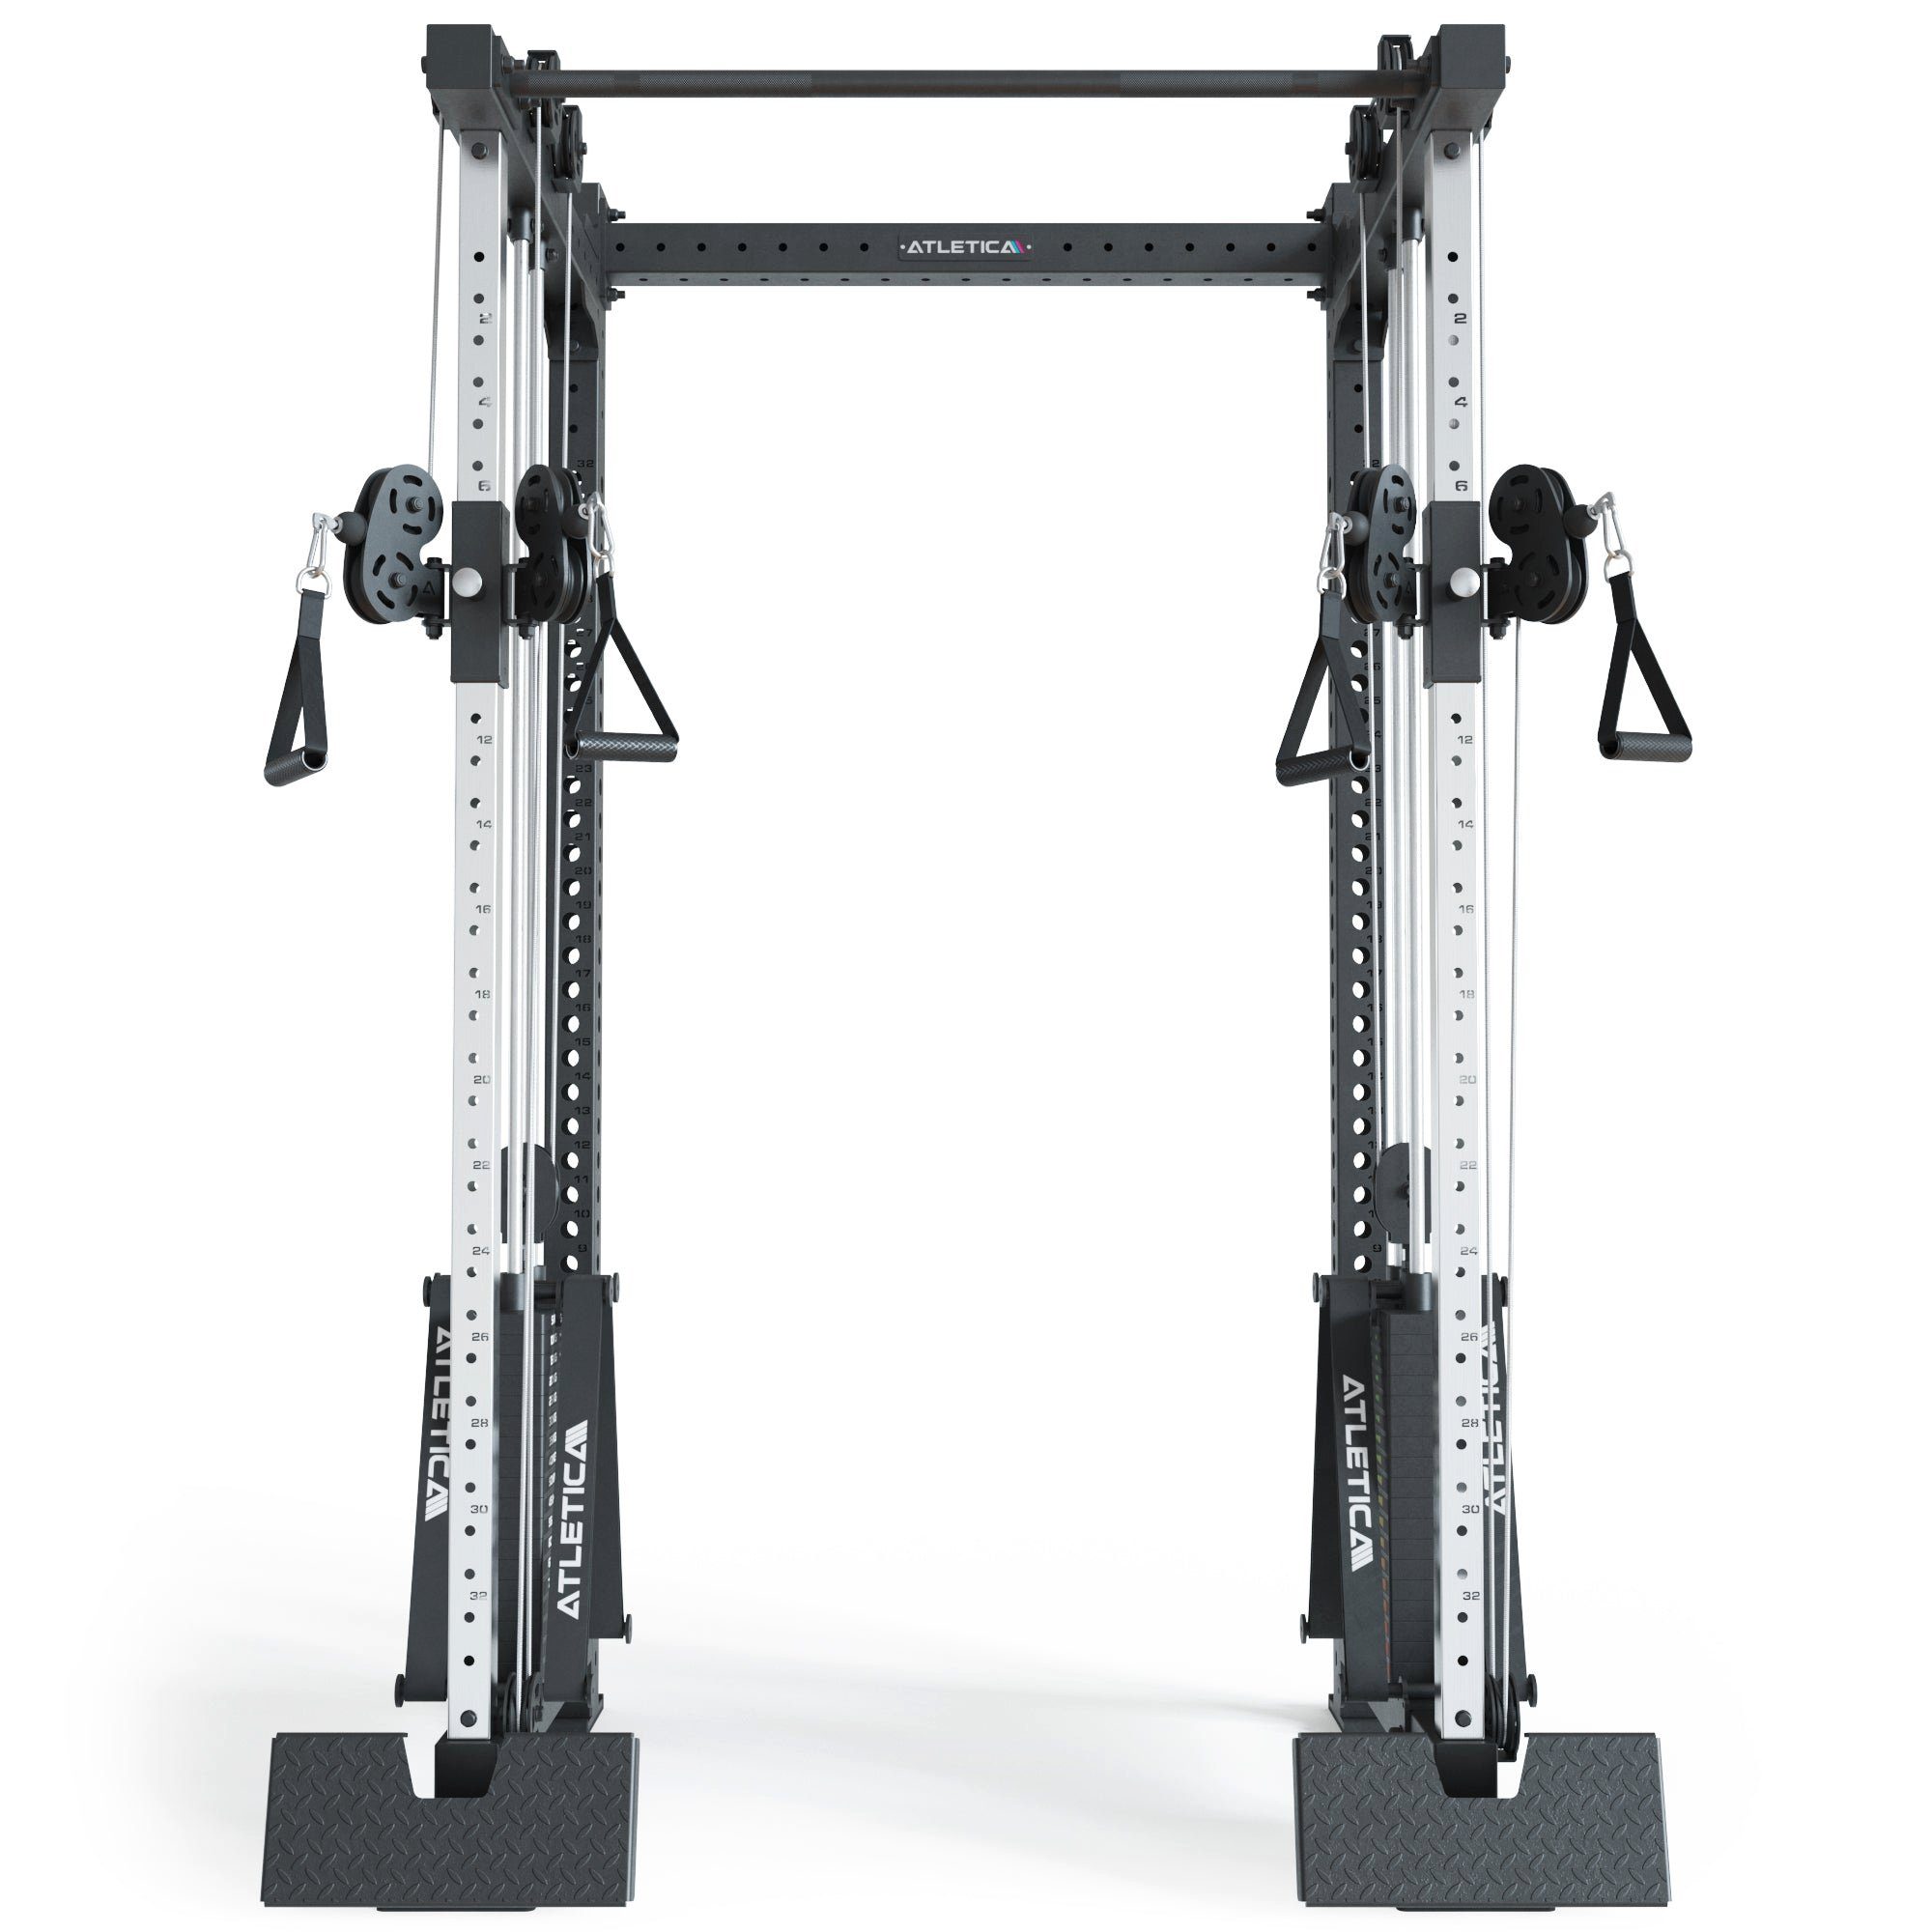 ATLETICA Stack, Rack, R8-Nitro Rack Stand-alone Power Mit kg Double Cable 2x90